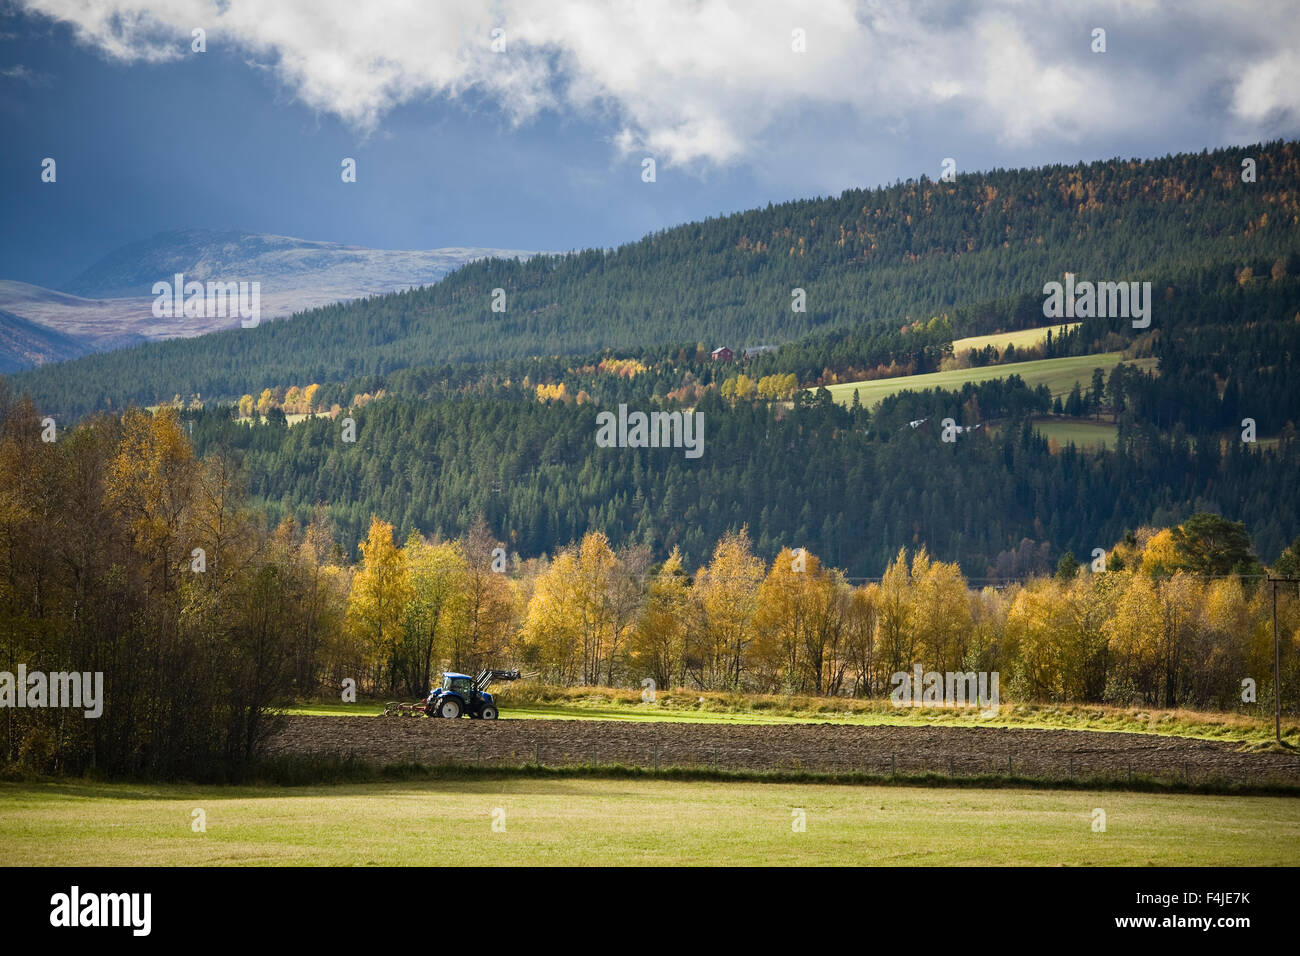 Tractor working in a field in the autumn, Norway. Stock Photo